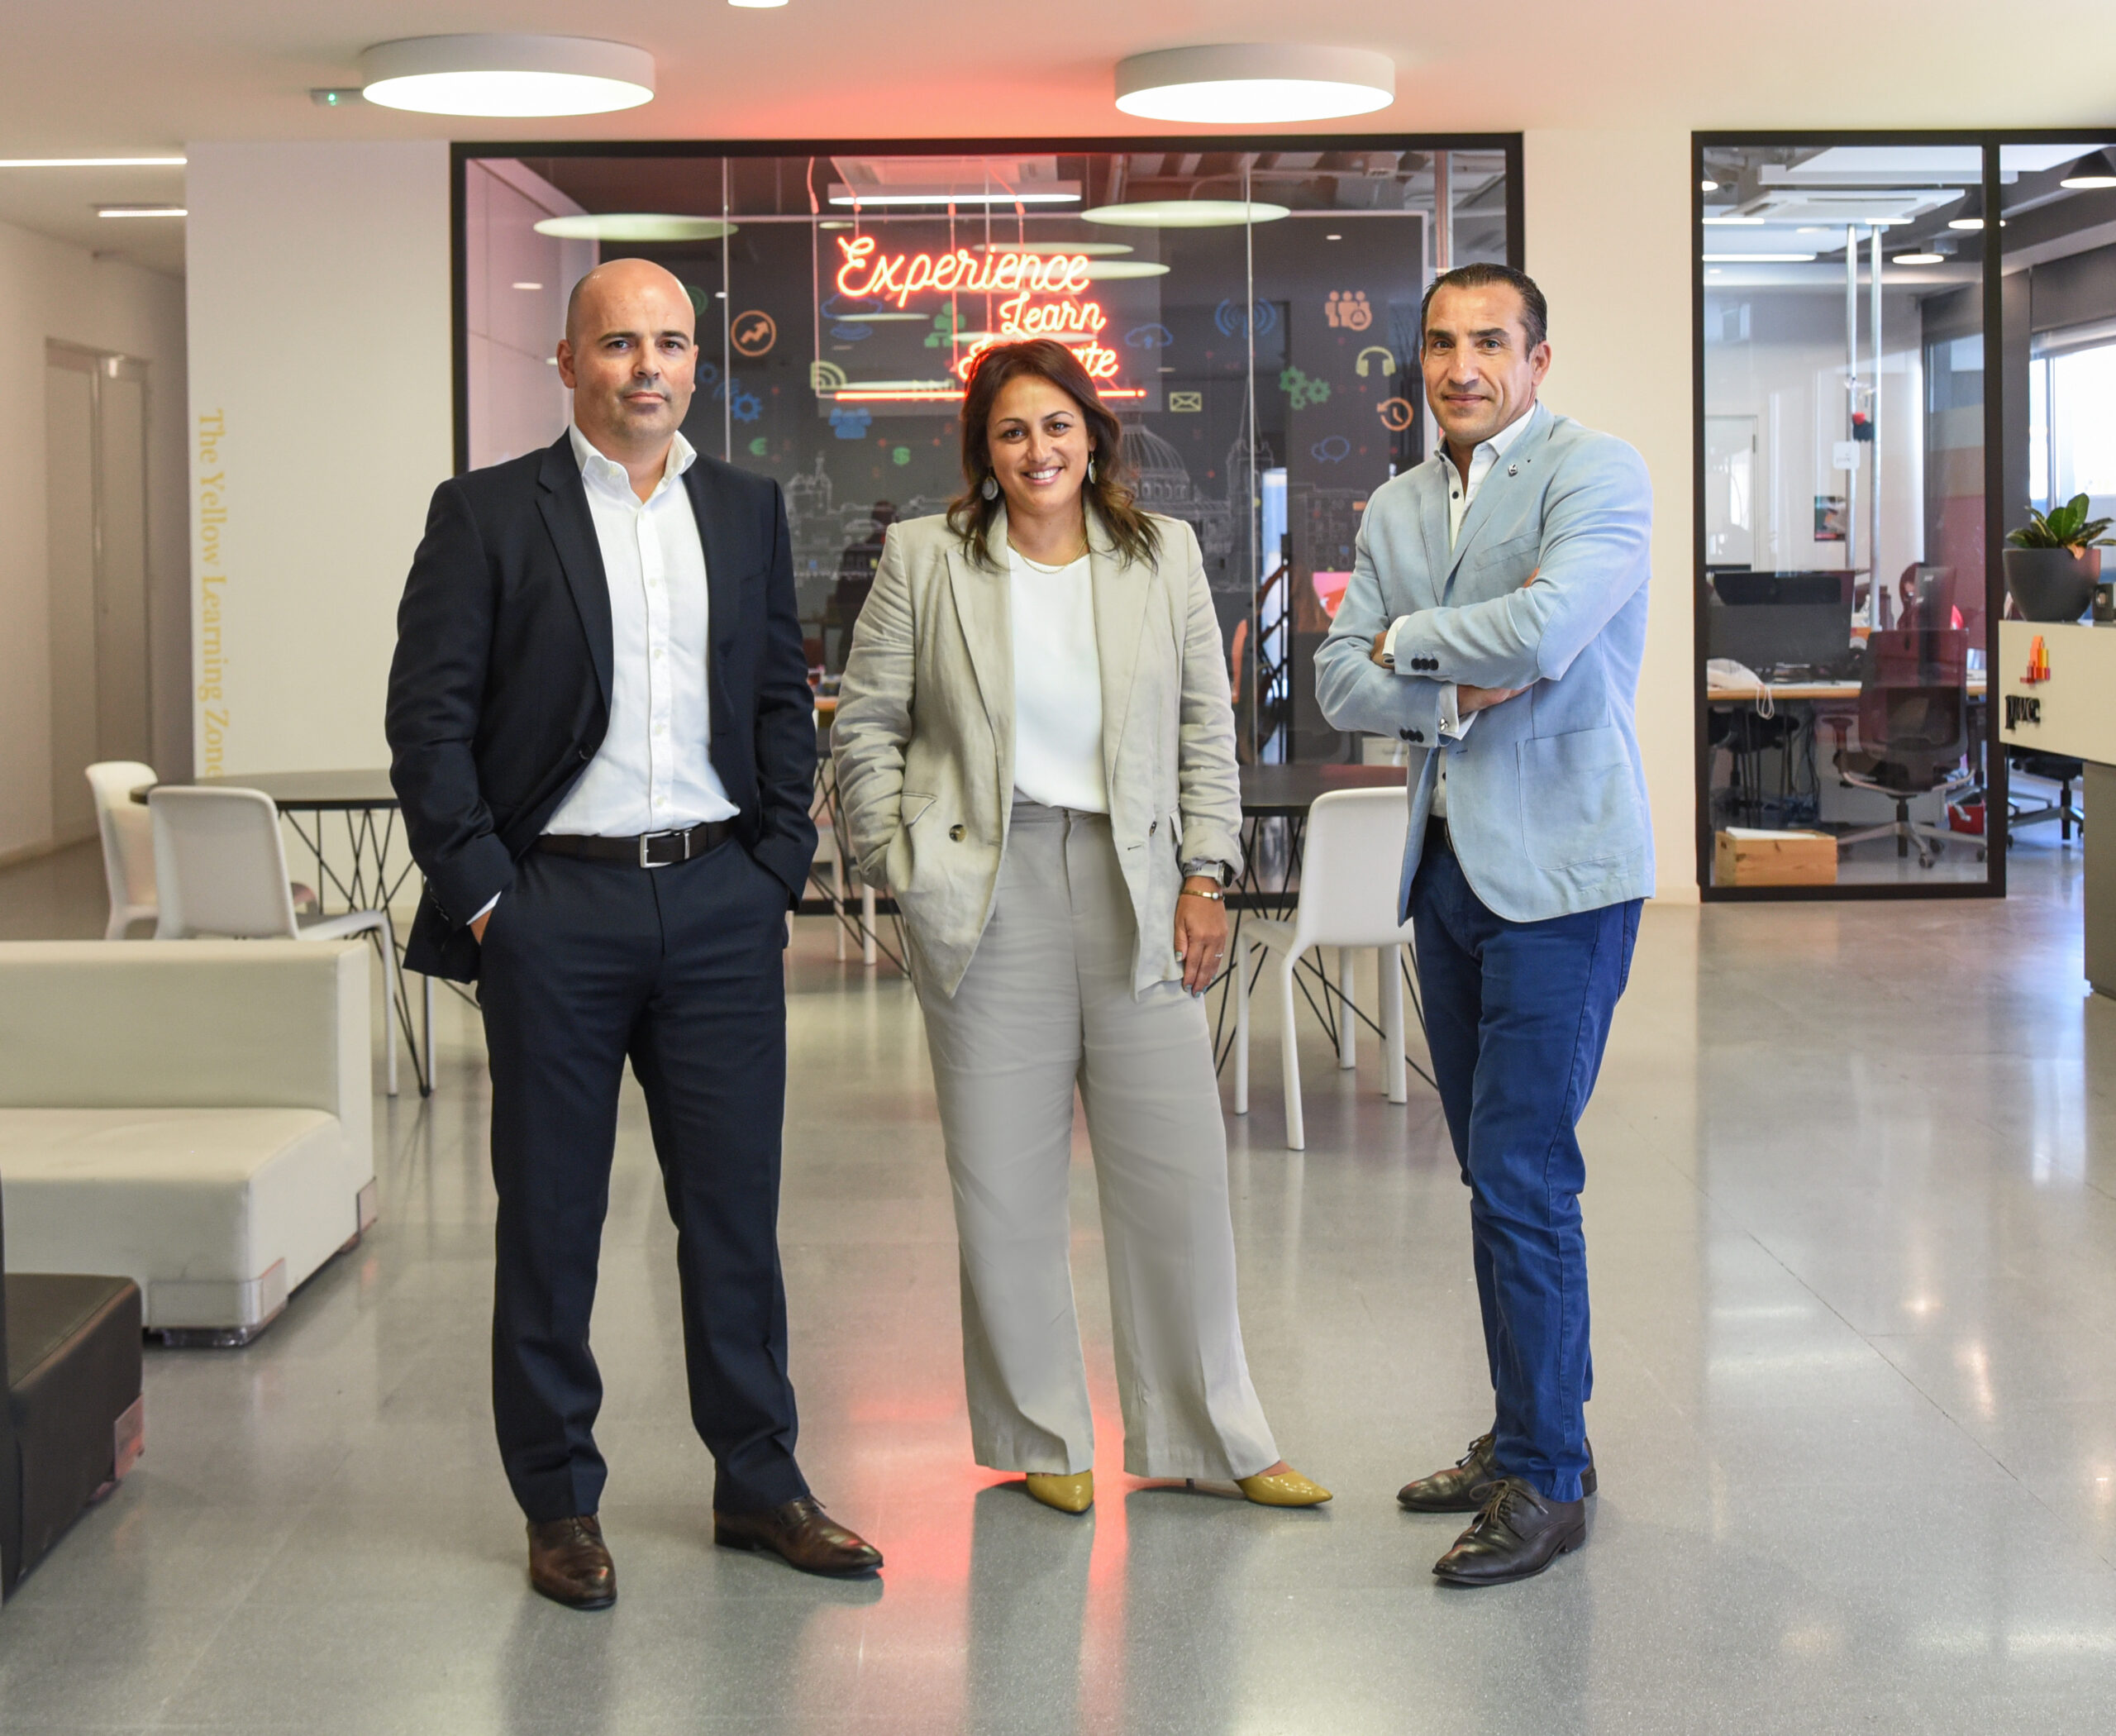 PwC Malta continues its growth and diversification by appointing two new directors and CTO